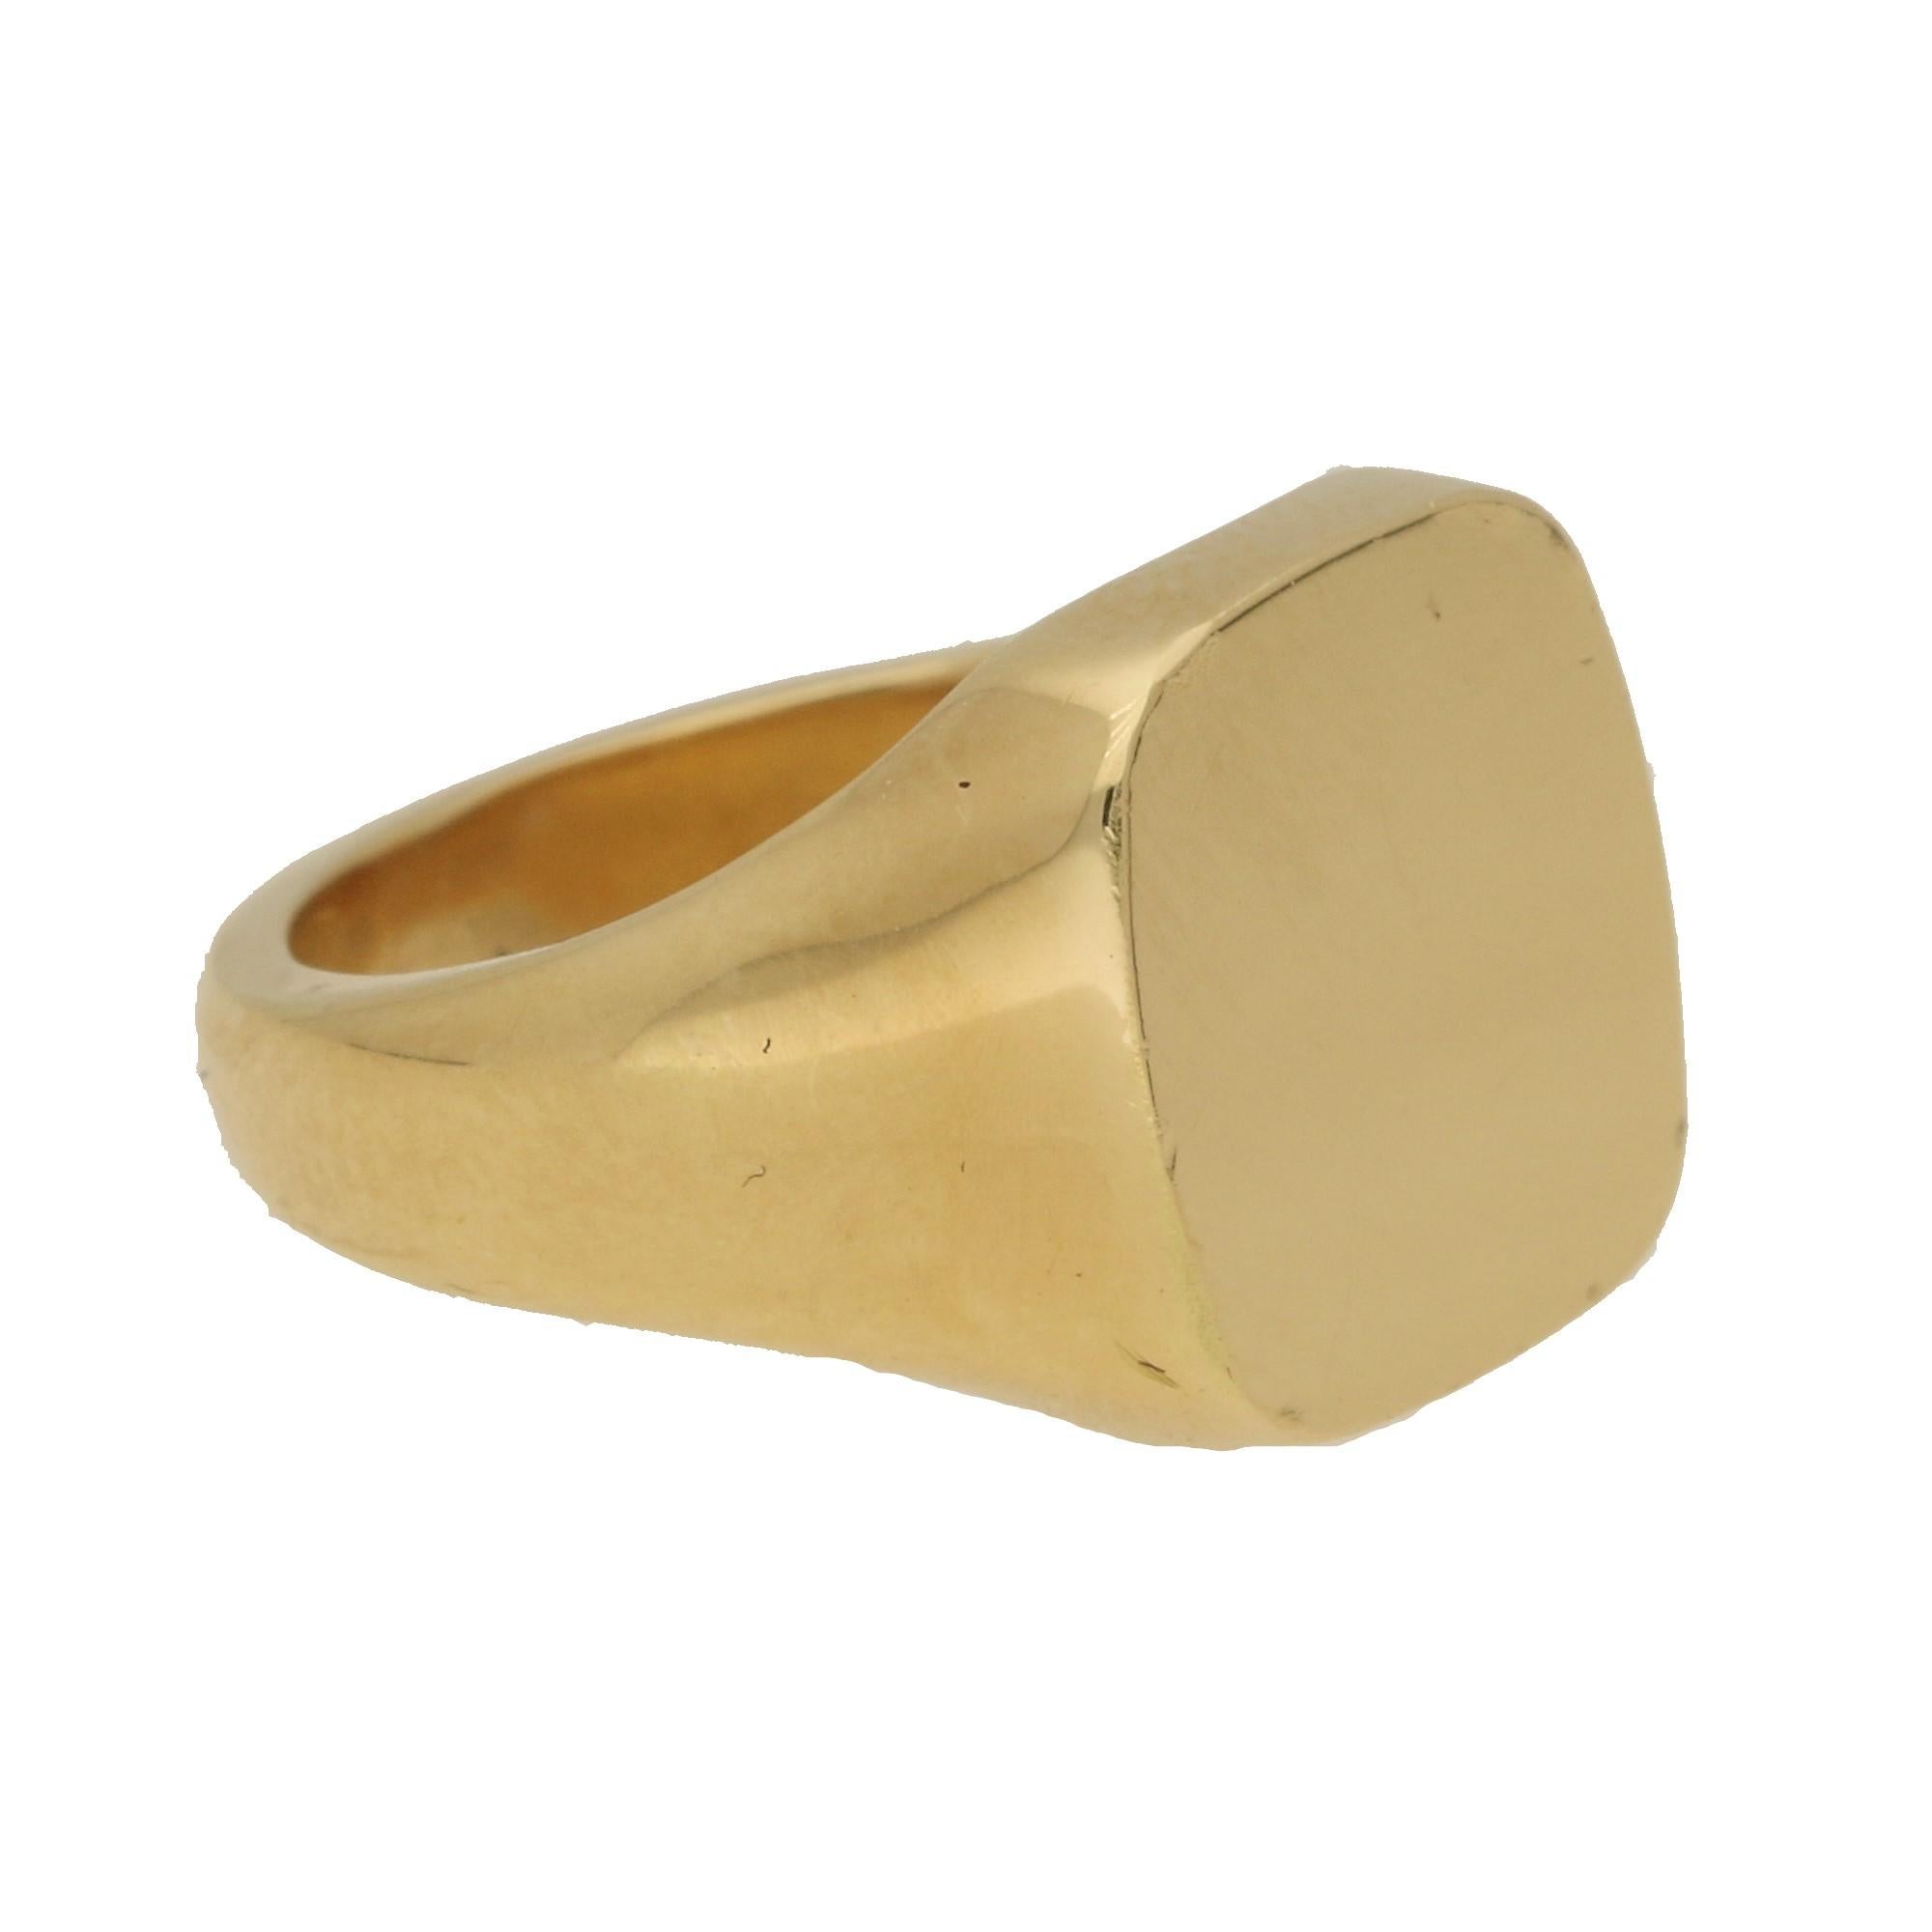 A classic cushion shaped signet ring made of solid 18k yellow gold.

The ring head measures approximately 11 x 11.5mm and is left bare so that the wearer has the option to customise it in the future. Typically signets are decorated with a family